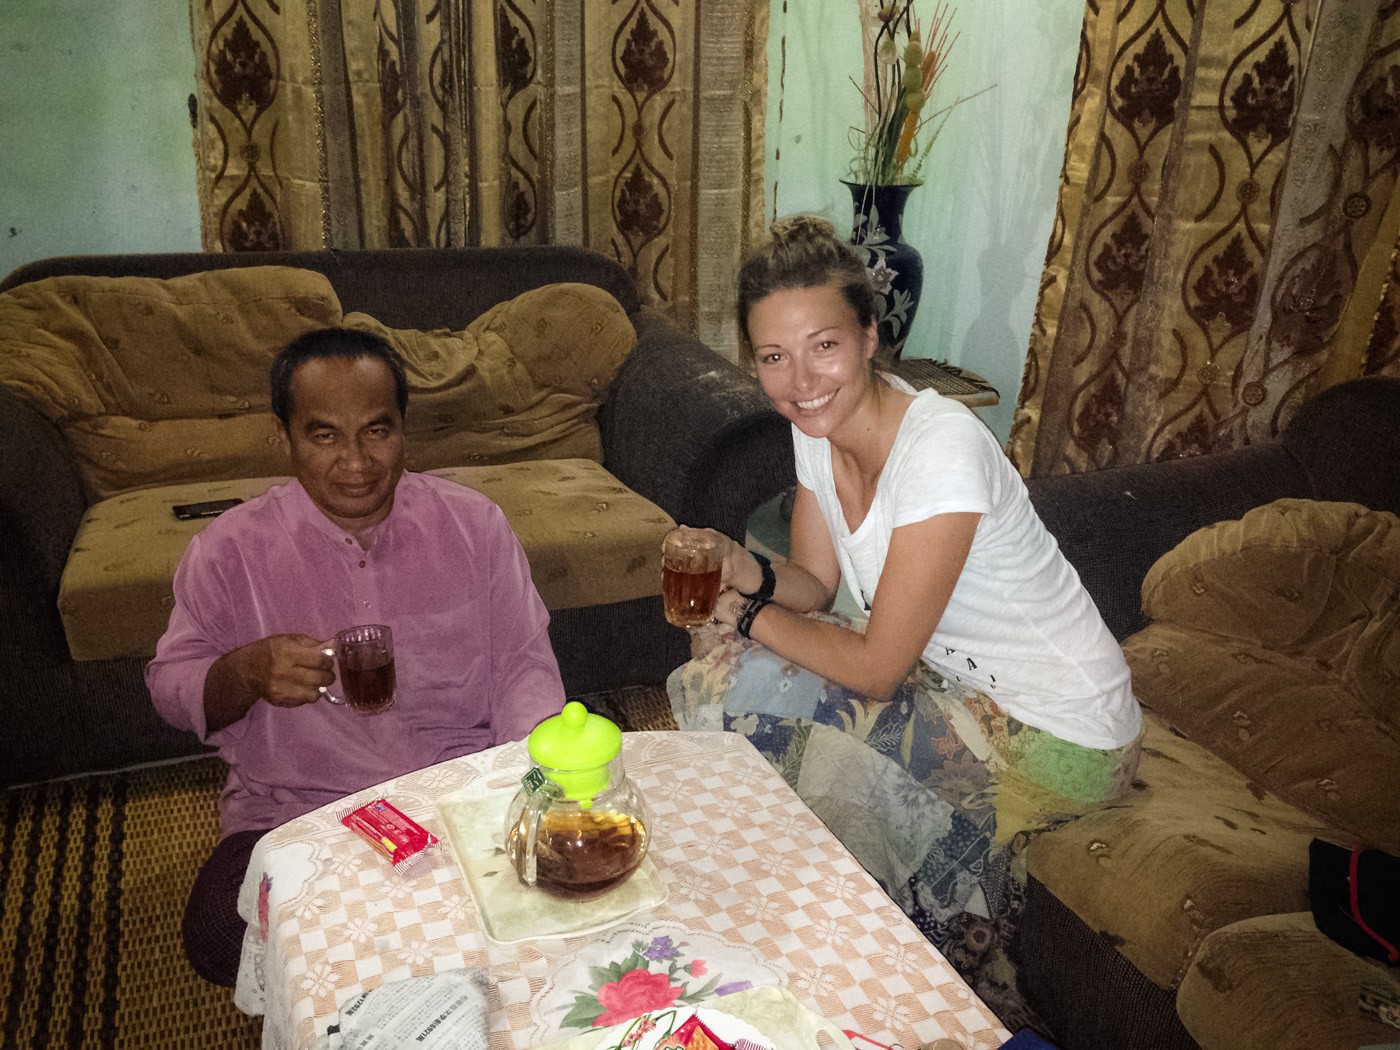 Sharing a cup of tea with my homestay host in Kota Belud, Sabah. Malaysia